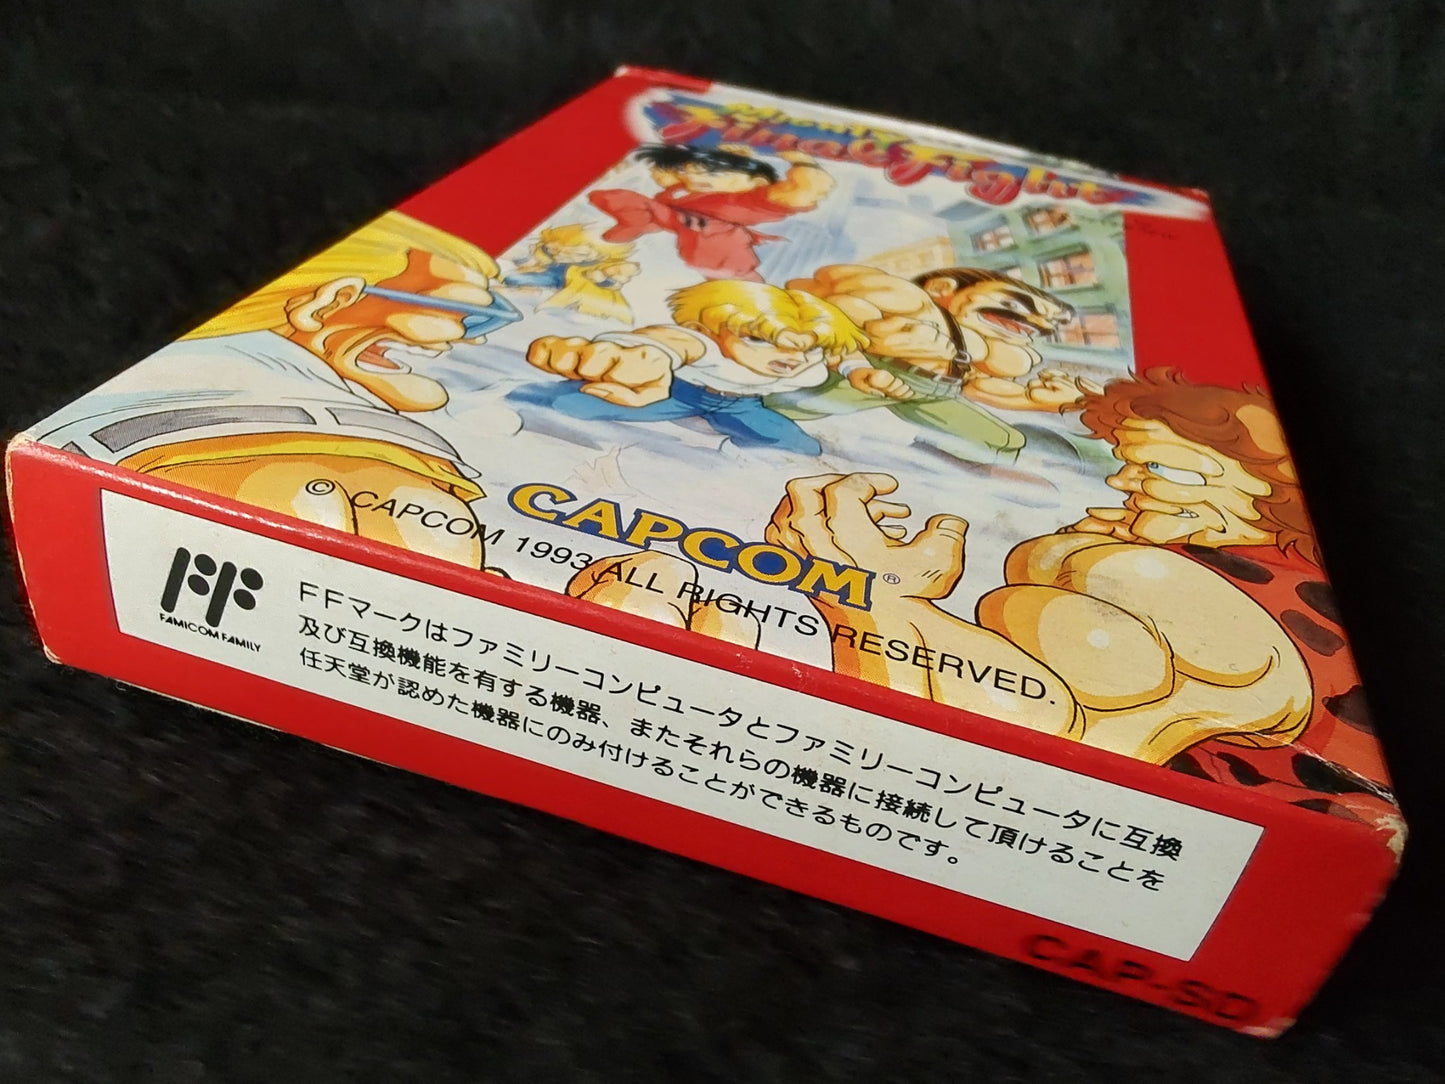 Mighty Final Fight Nintendo Famicom NES Cartridge,Manual Boxed set tested-g0130-